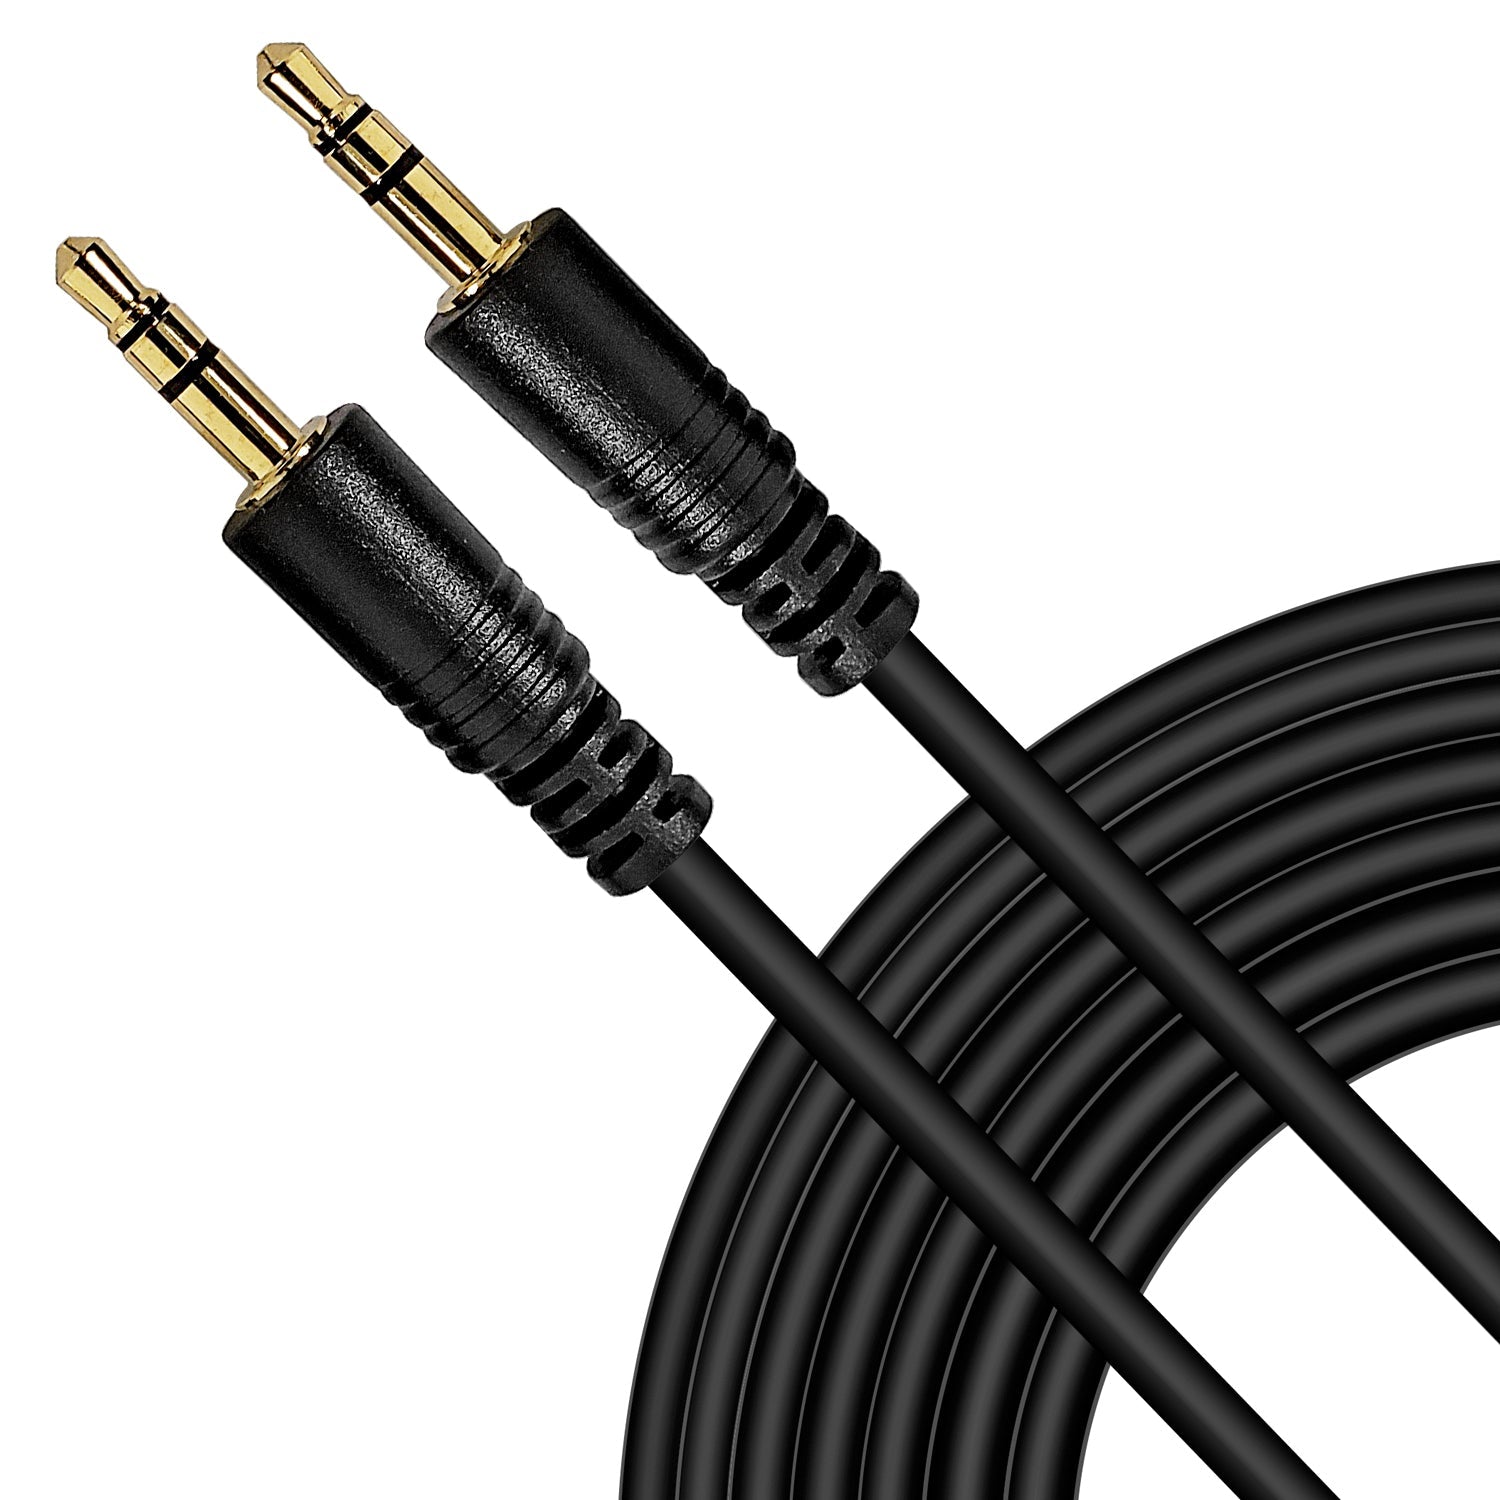 Audio cable with a 3.5mm male-male jack